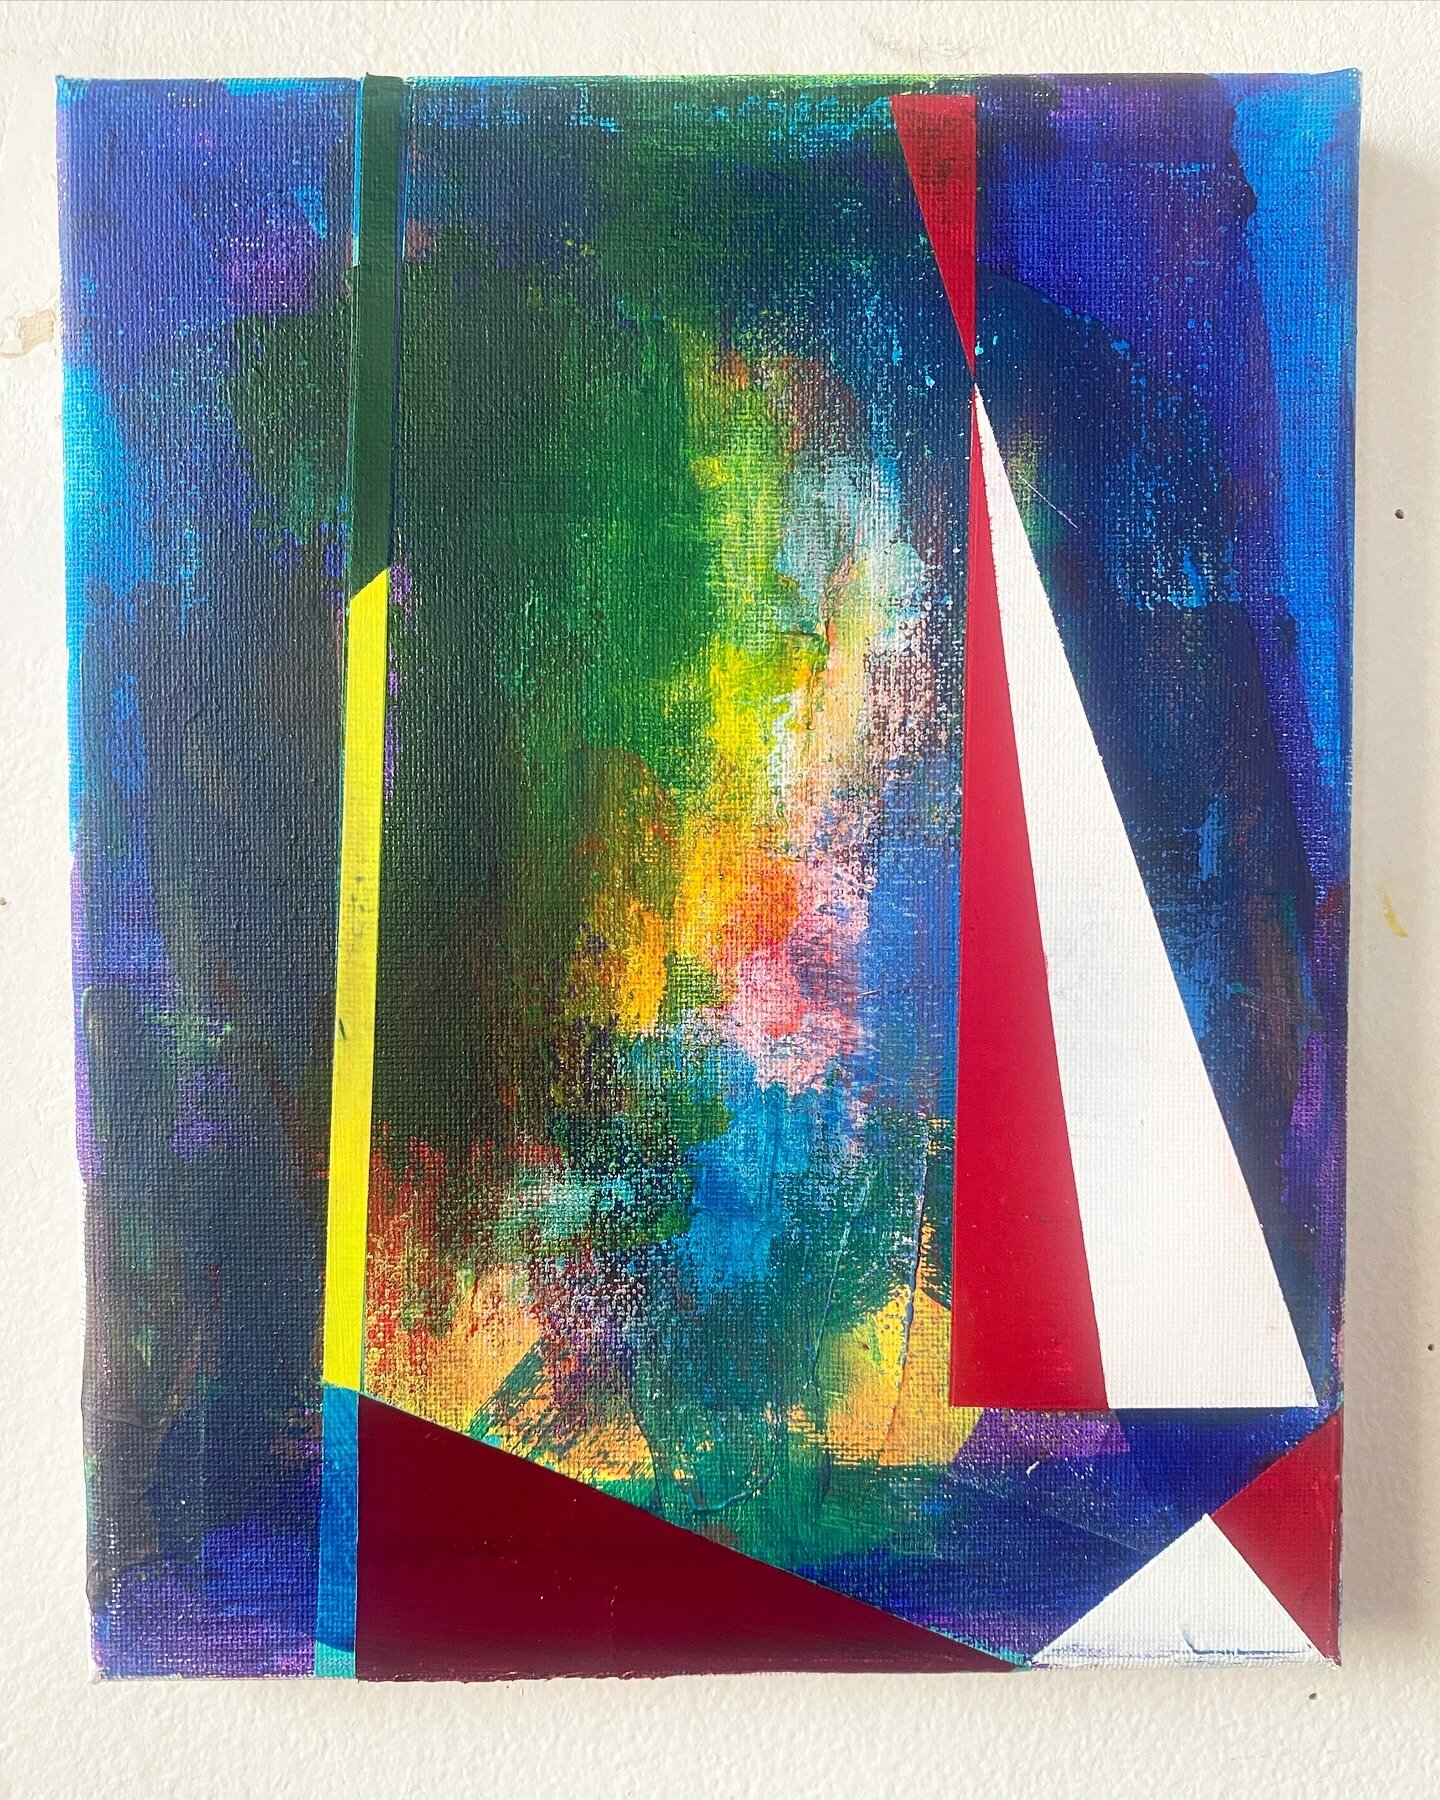 Quirky yet feels complete. Says, &ldquo;stay away, but you can come in when you&rsquo;re ready.&rdquo; 8 x10 inches #acrylicpainting #acryliconcanvas #art #abstractart #painting #nycpainter #brooklynpainter